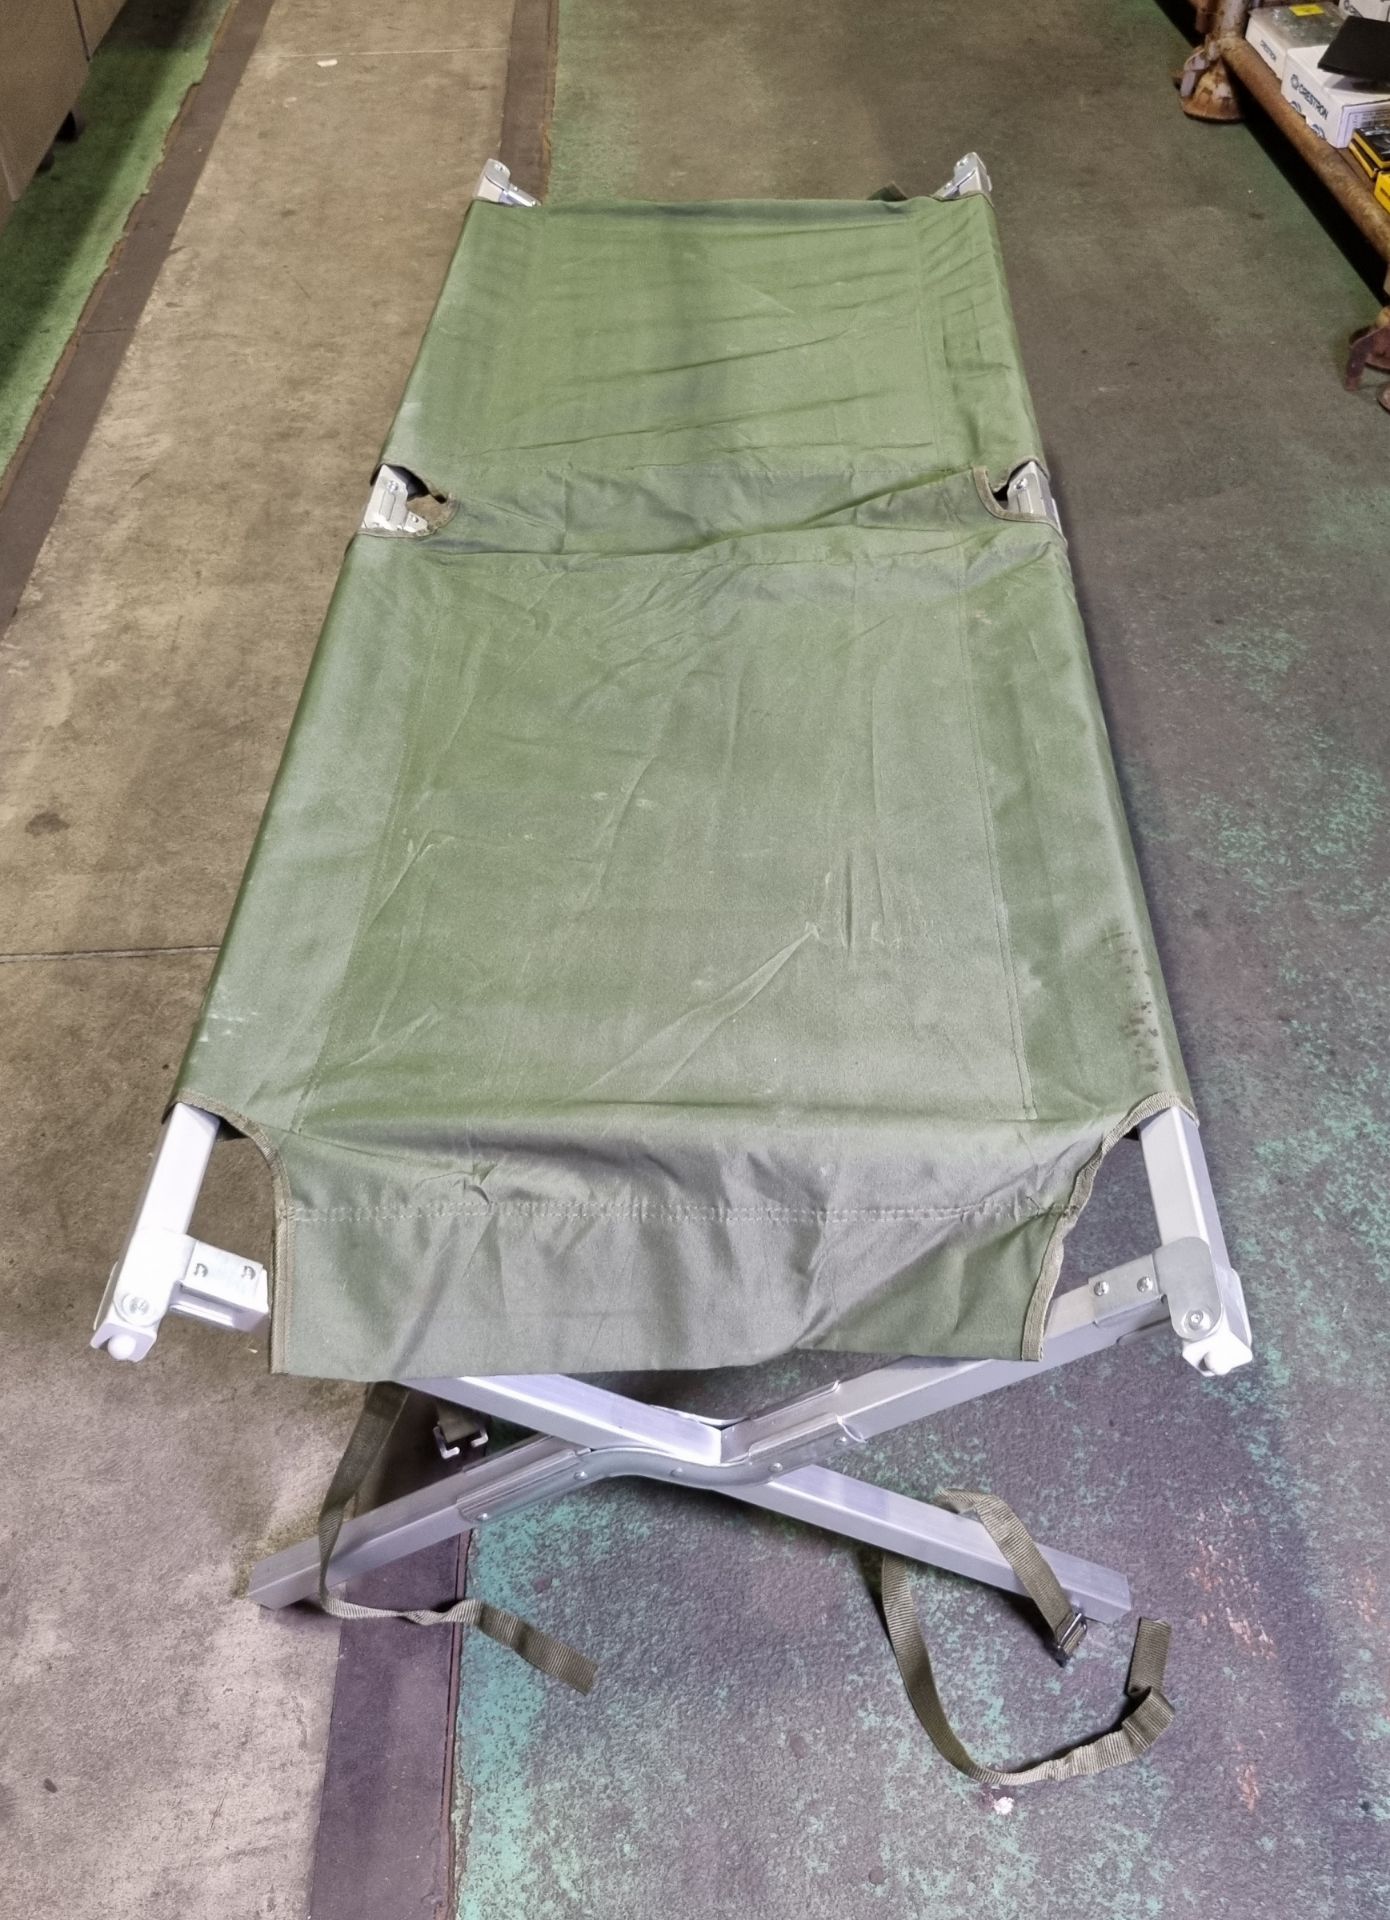 15x Folding field cots with carry bag - L 1900 x W 700 x H 450mm - Image 2 of 4